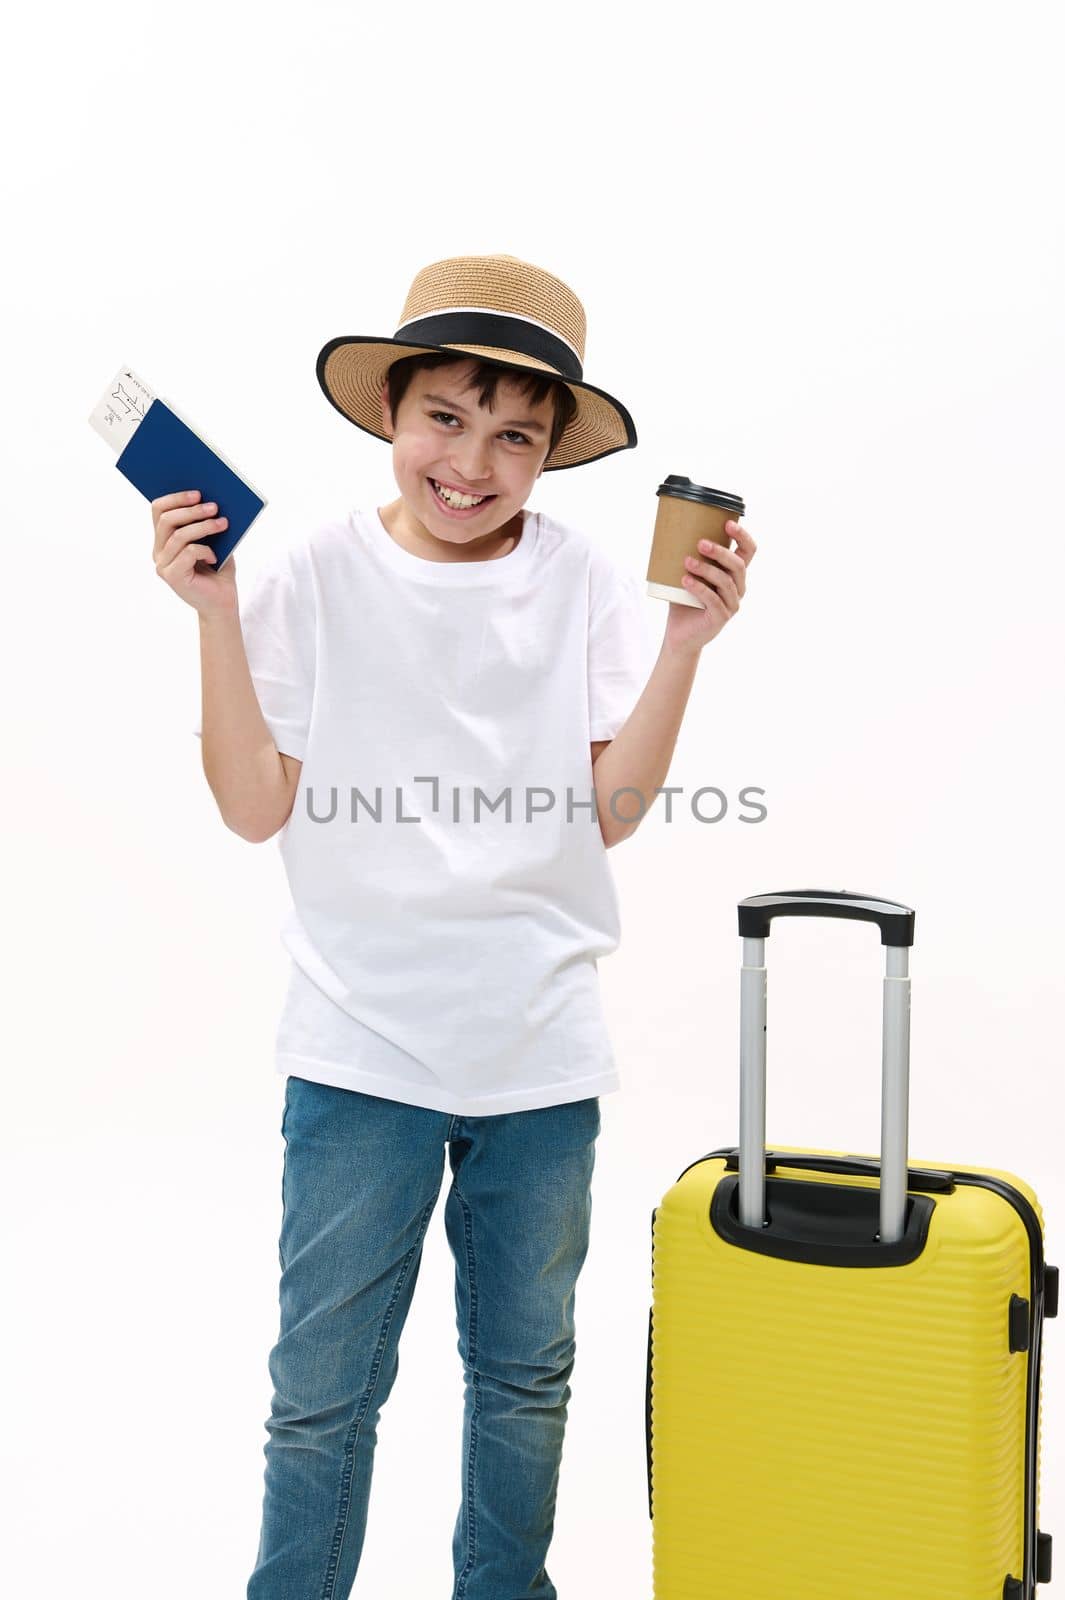 Teenage boy excited about summer vacation trip. Joyful teenager with travel bag, disposable paper cup of hot drink and boarding pass waiting for flight, isolated on white background. Vacation concept